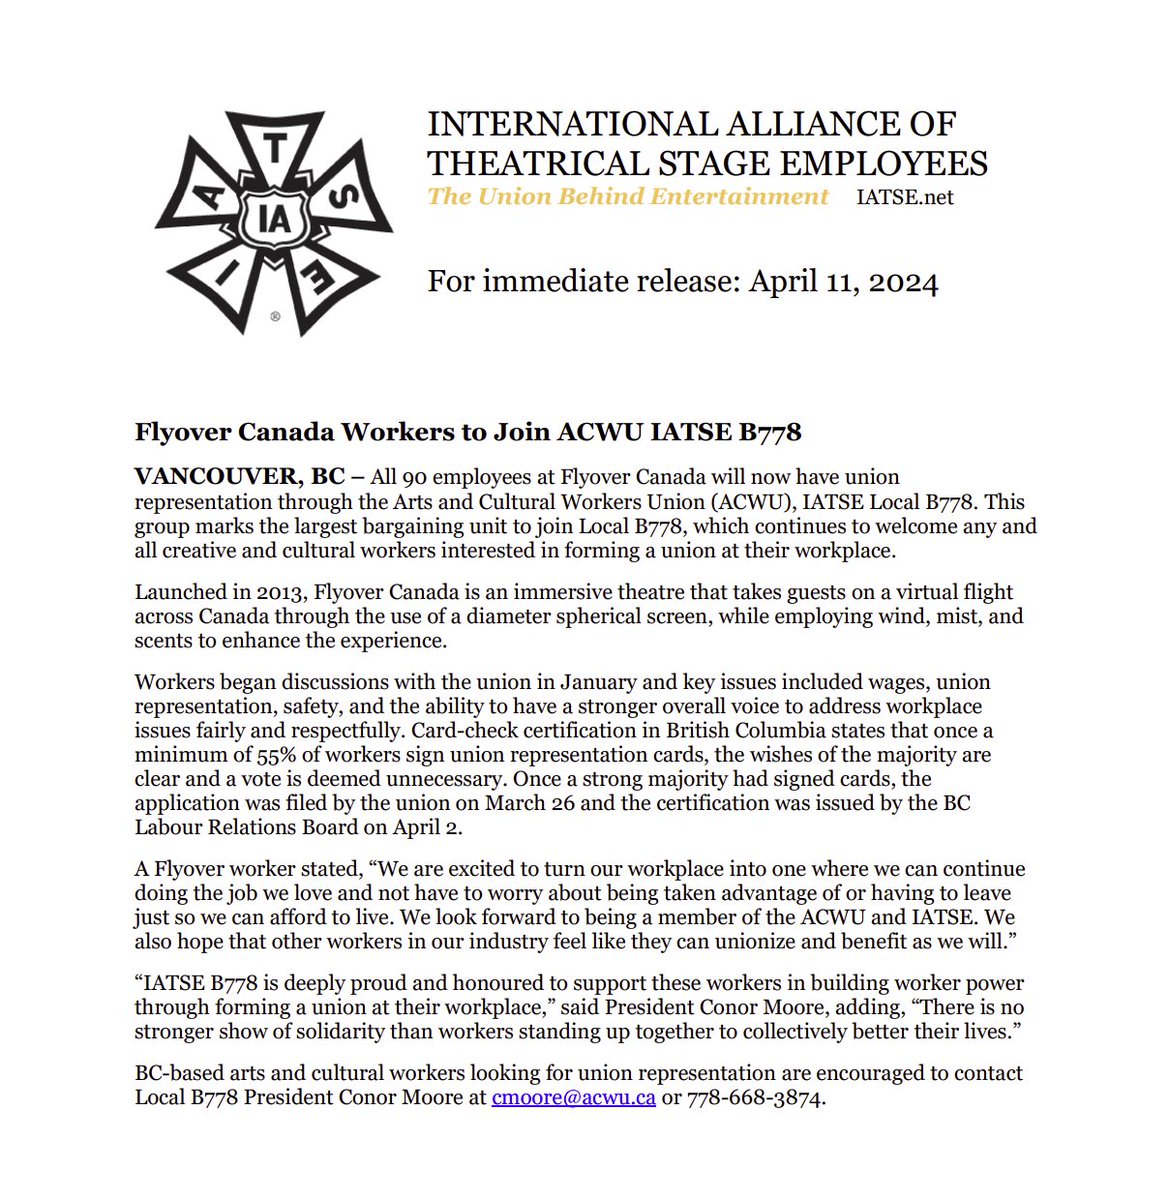 All 90 employees at Flyover Canada will now have #union representation through the Arts and Cultural Workers Union (ACWU), @IATSE Local B778! Congratulations, and welcome to the #IATSE family! #StrongerTogether #Solidarity #UnionStrong Communique here: shorturl.at/bghCI